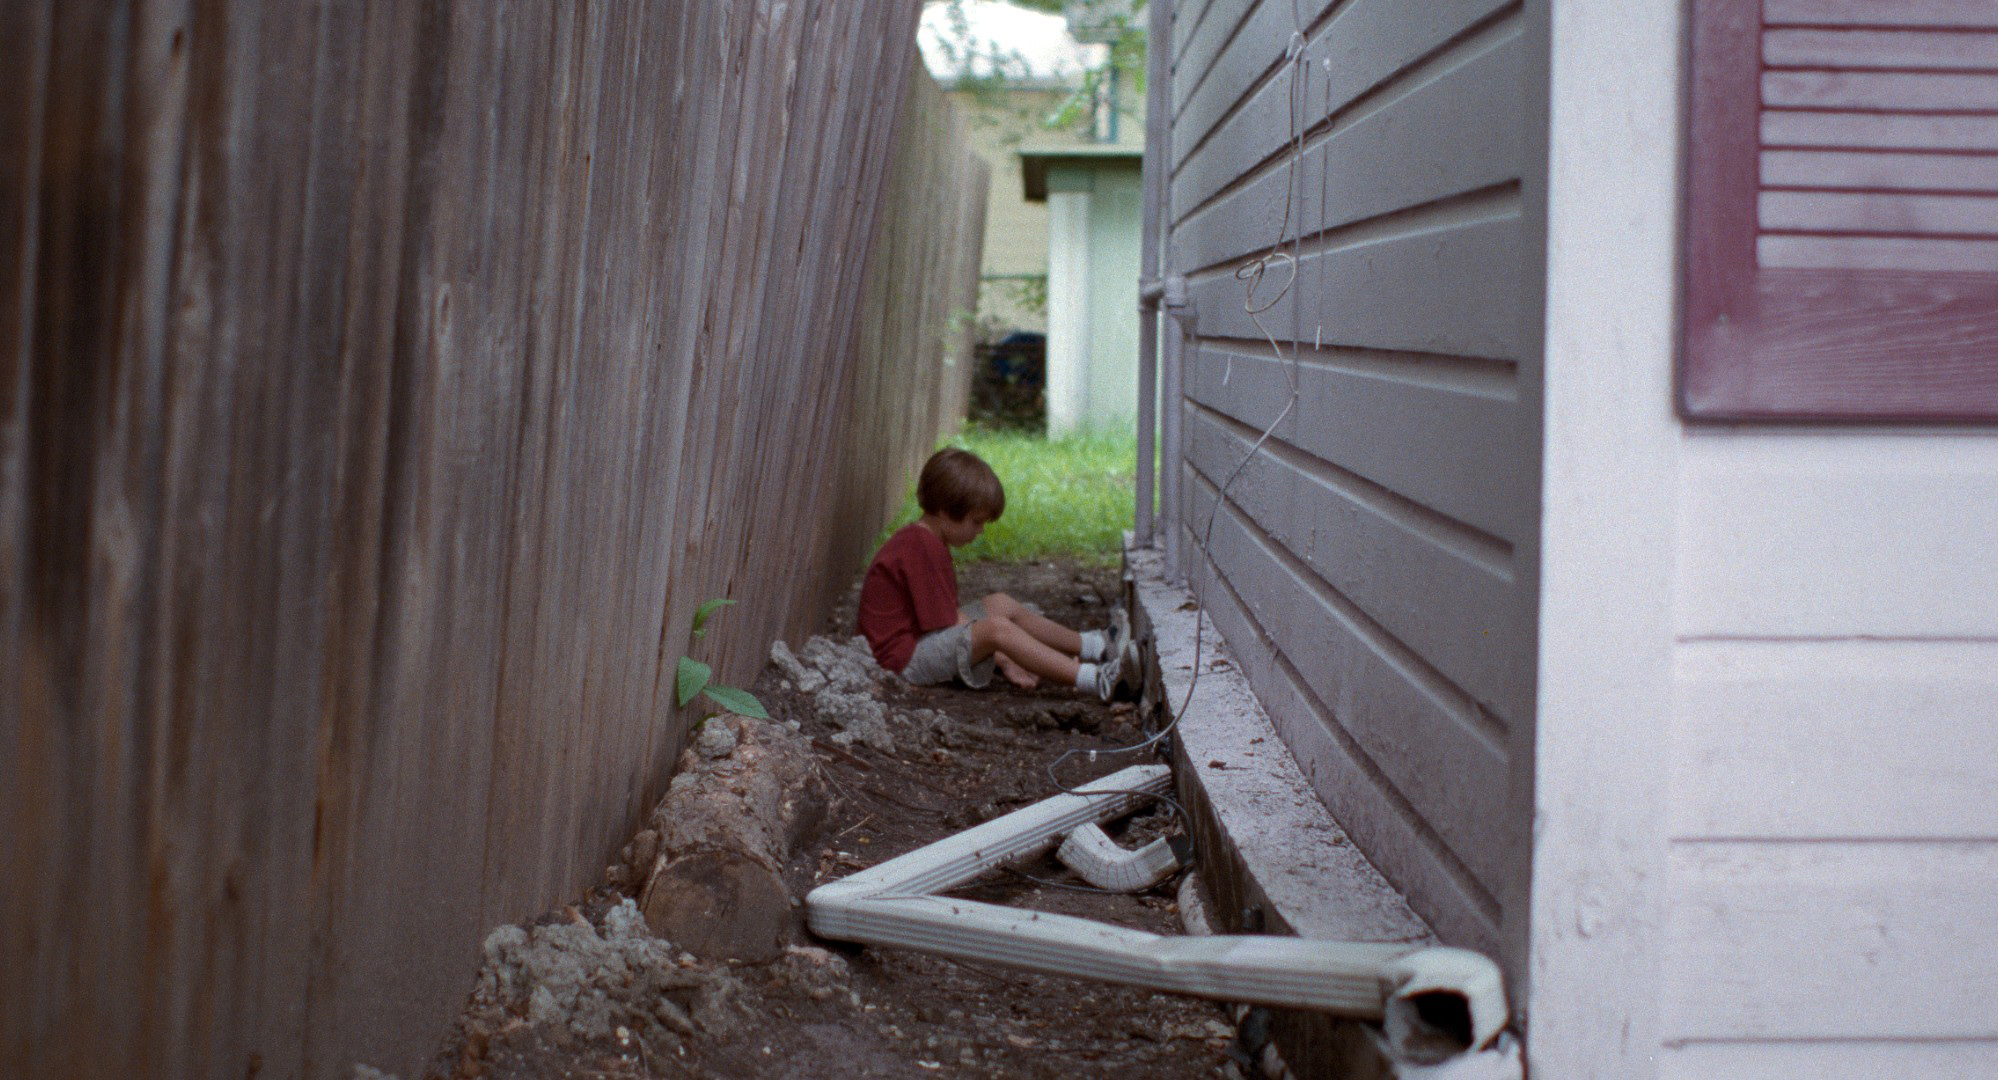 boyhood still little child sits in between house and fence in red shirt and tennis shoes